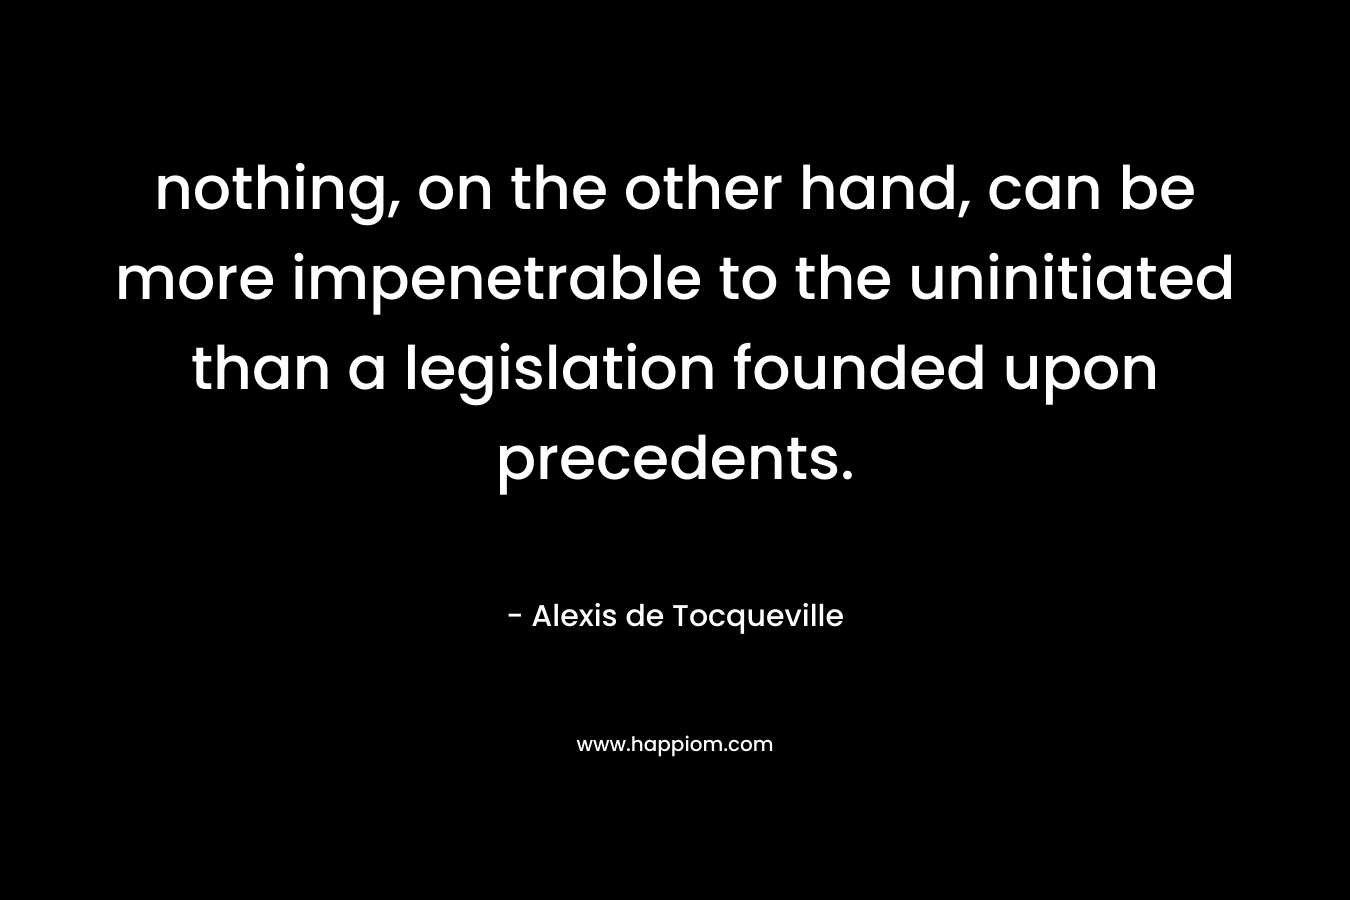 nothing, on the other hand, can be more impenetrable to the uninitiated than a legislation founded upon precedents. – Alexis de Tocqueville